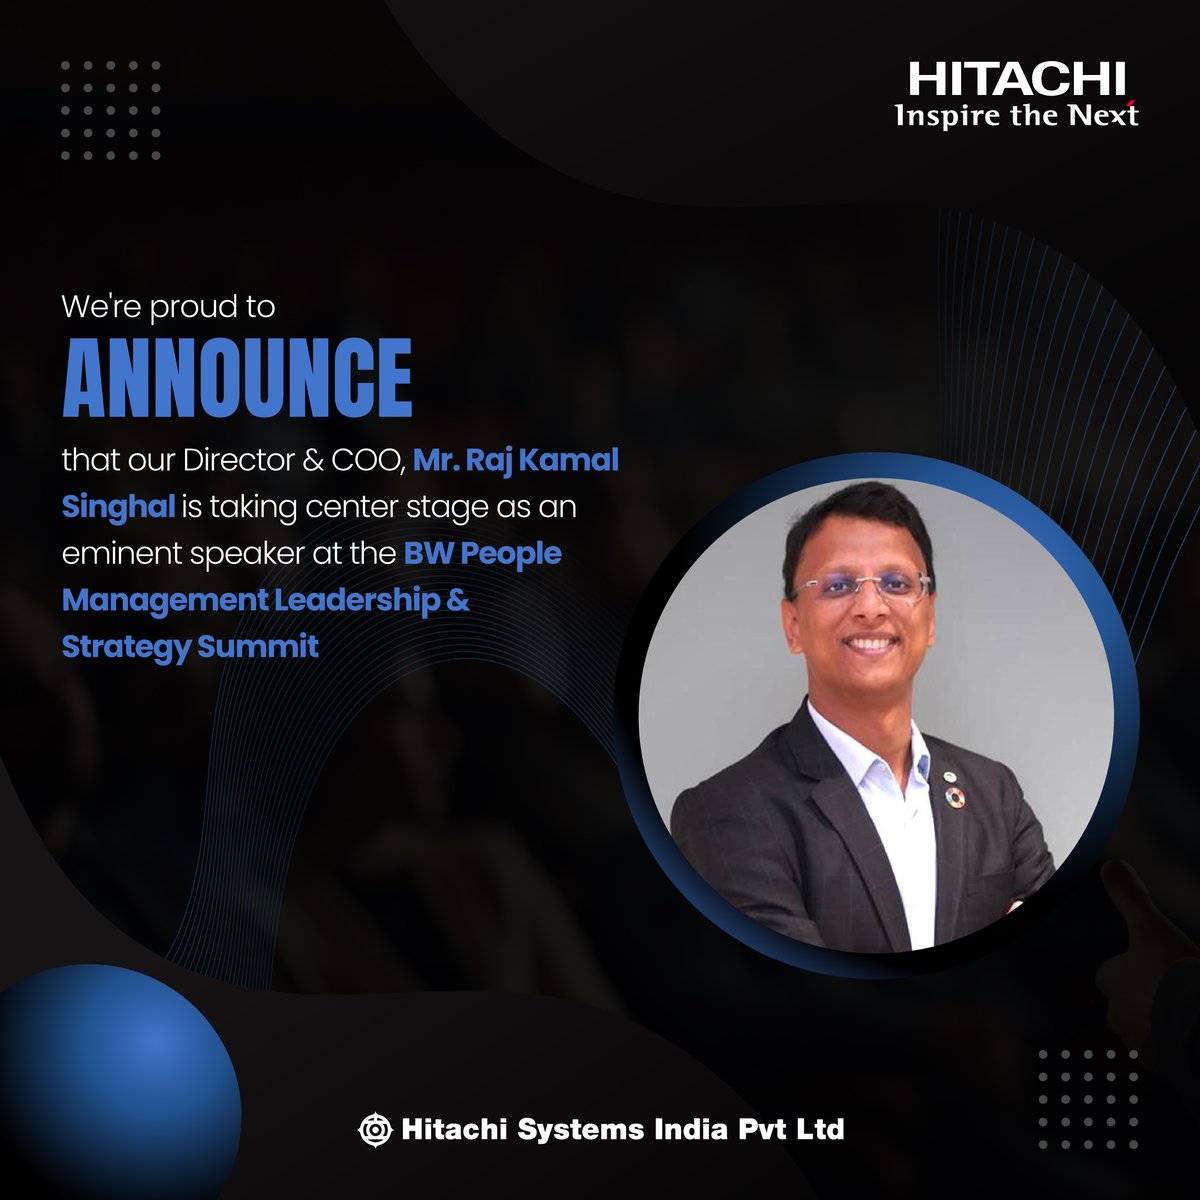 We're thrilled to share that our Director and COO, Mr. Raj Kamal Singhal, will be a distinguished speaker at the upcoming BW People Management Leadership & Strategy Summit!

#LeadershipSummit #HitachiLeadership #LearningCulture #IamHitachi #COO #WinningTogether #PrideofHitachi